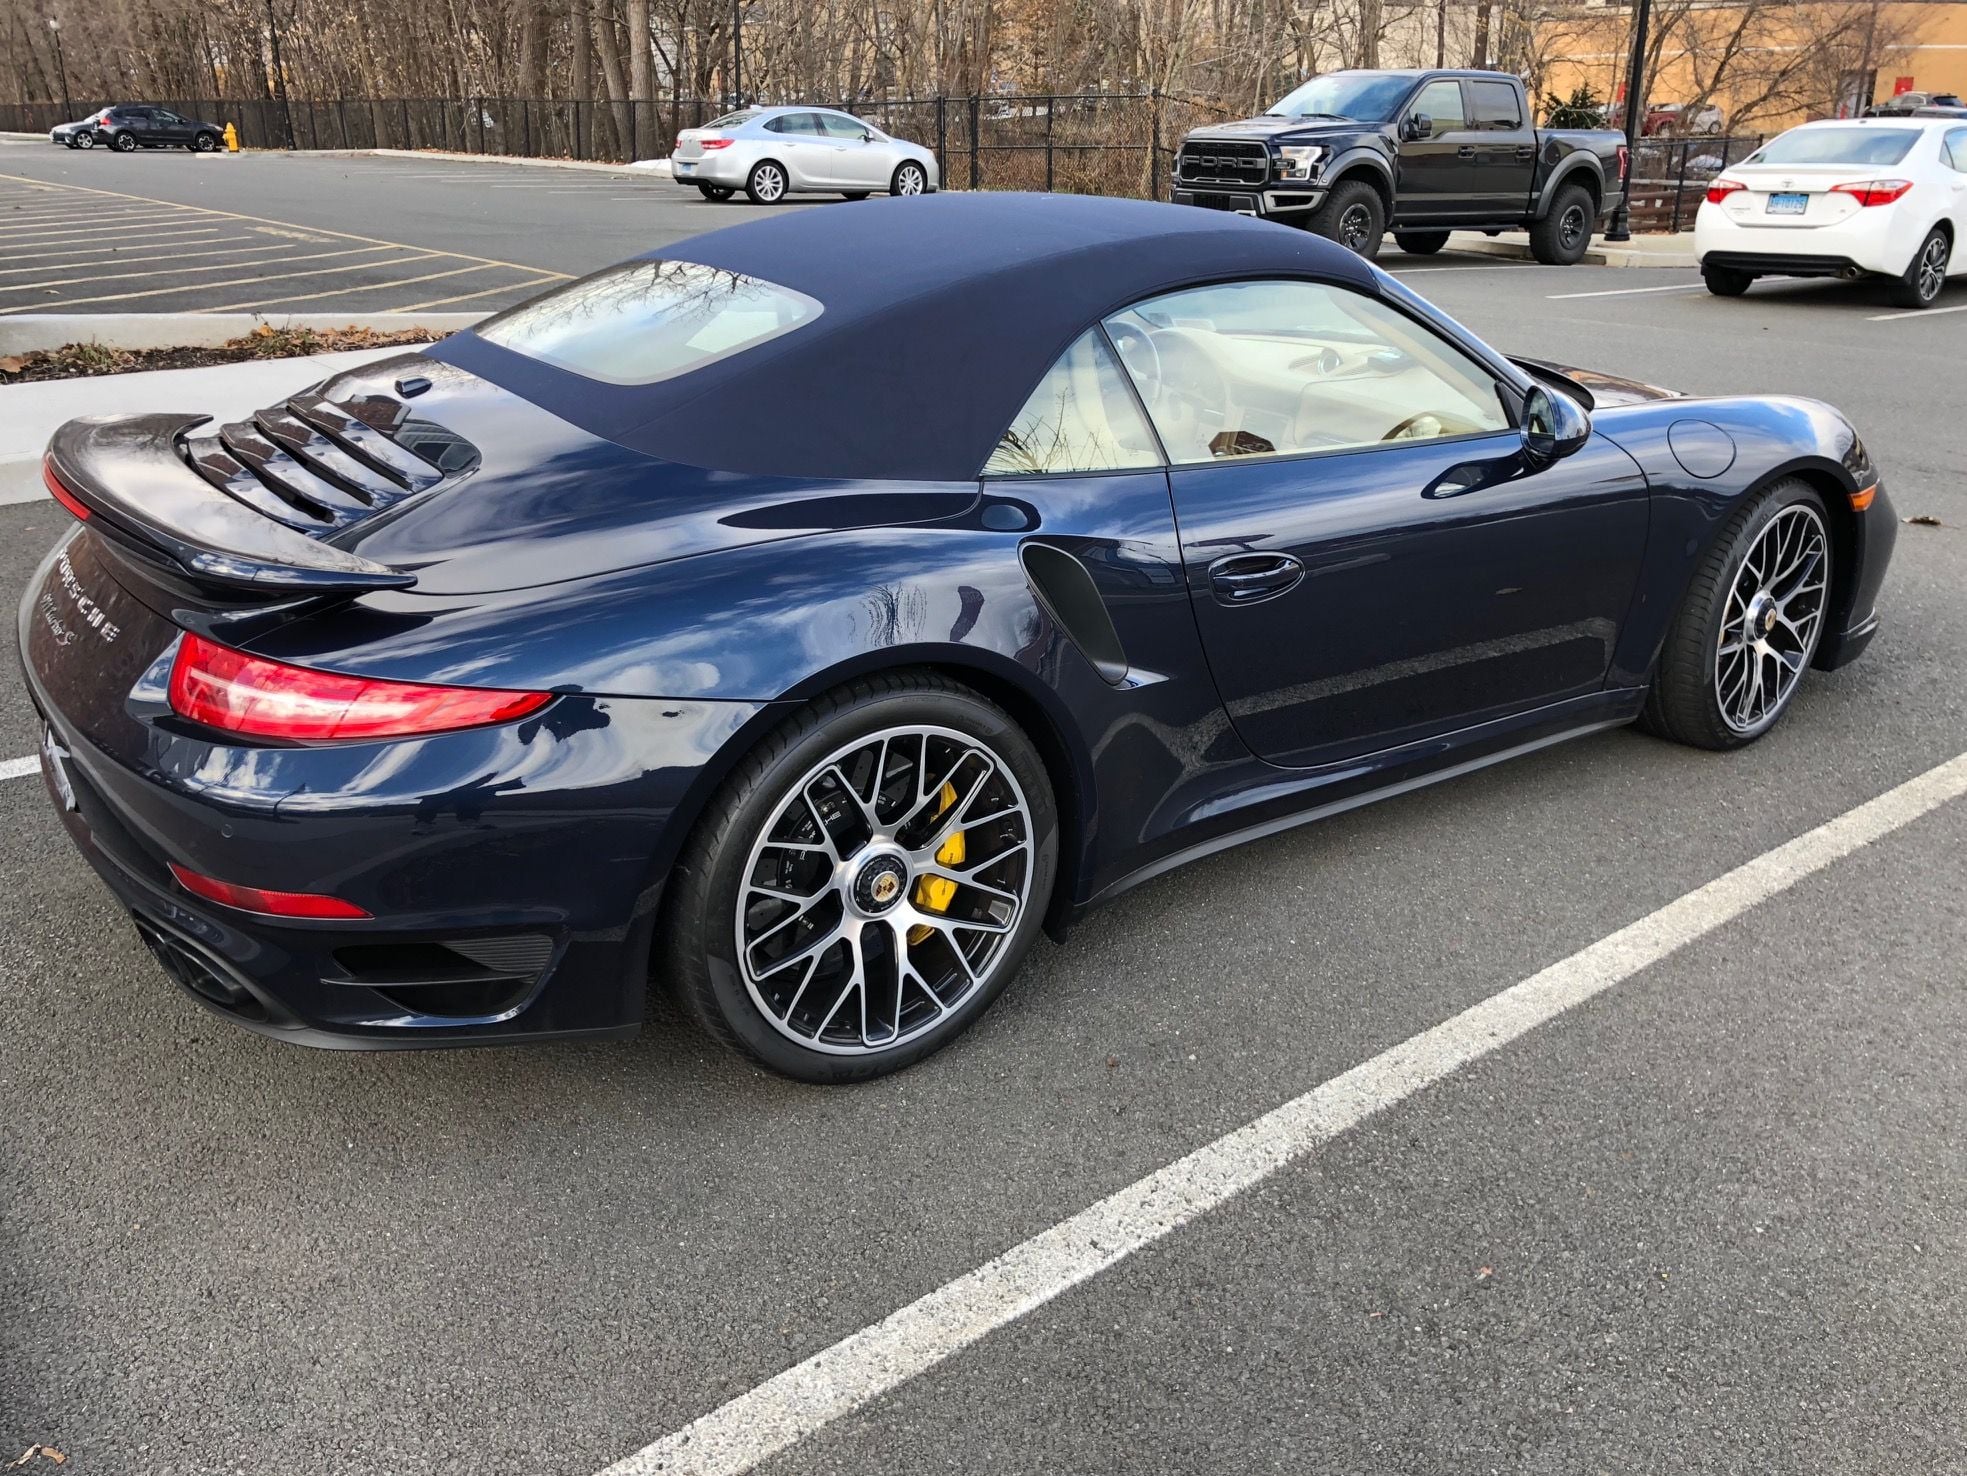 2014 Porsche 911 - 2014 Porsche Turbo S Cabriolet with By Design Stage 4 and Methanol - Used - VIN WP0CD2A97ES173312 - 16,112 Miles - 6 cyl - AWD - Convertible - Blue - Danbury, CT 06810, United States